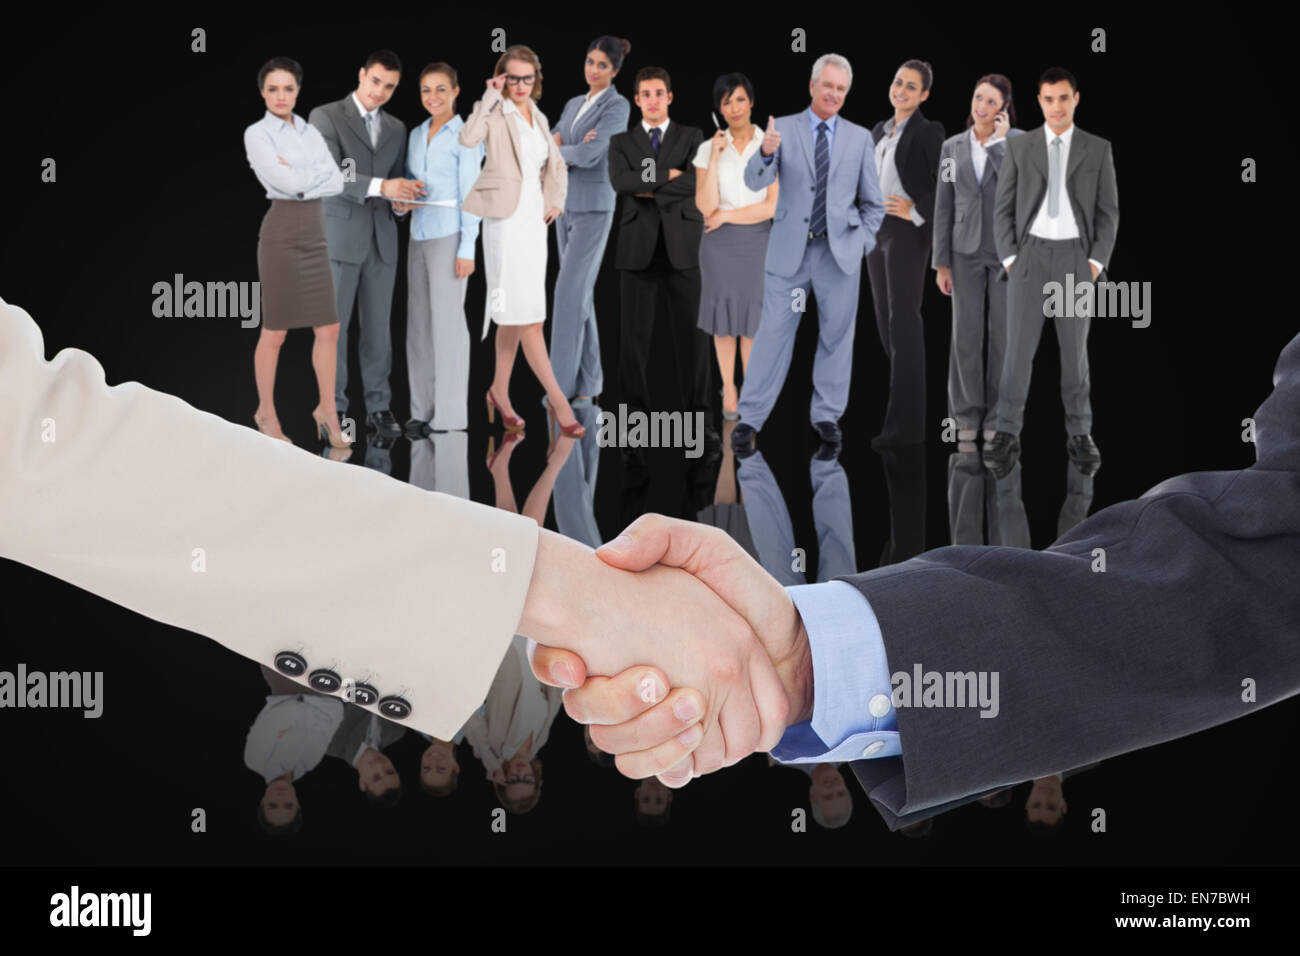 Composite image of smiling business people shaking hands while looking at the camera Stock Photo